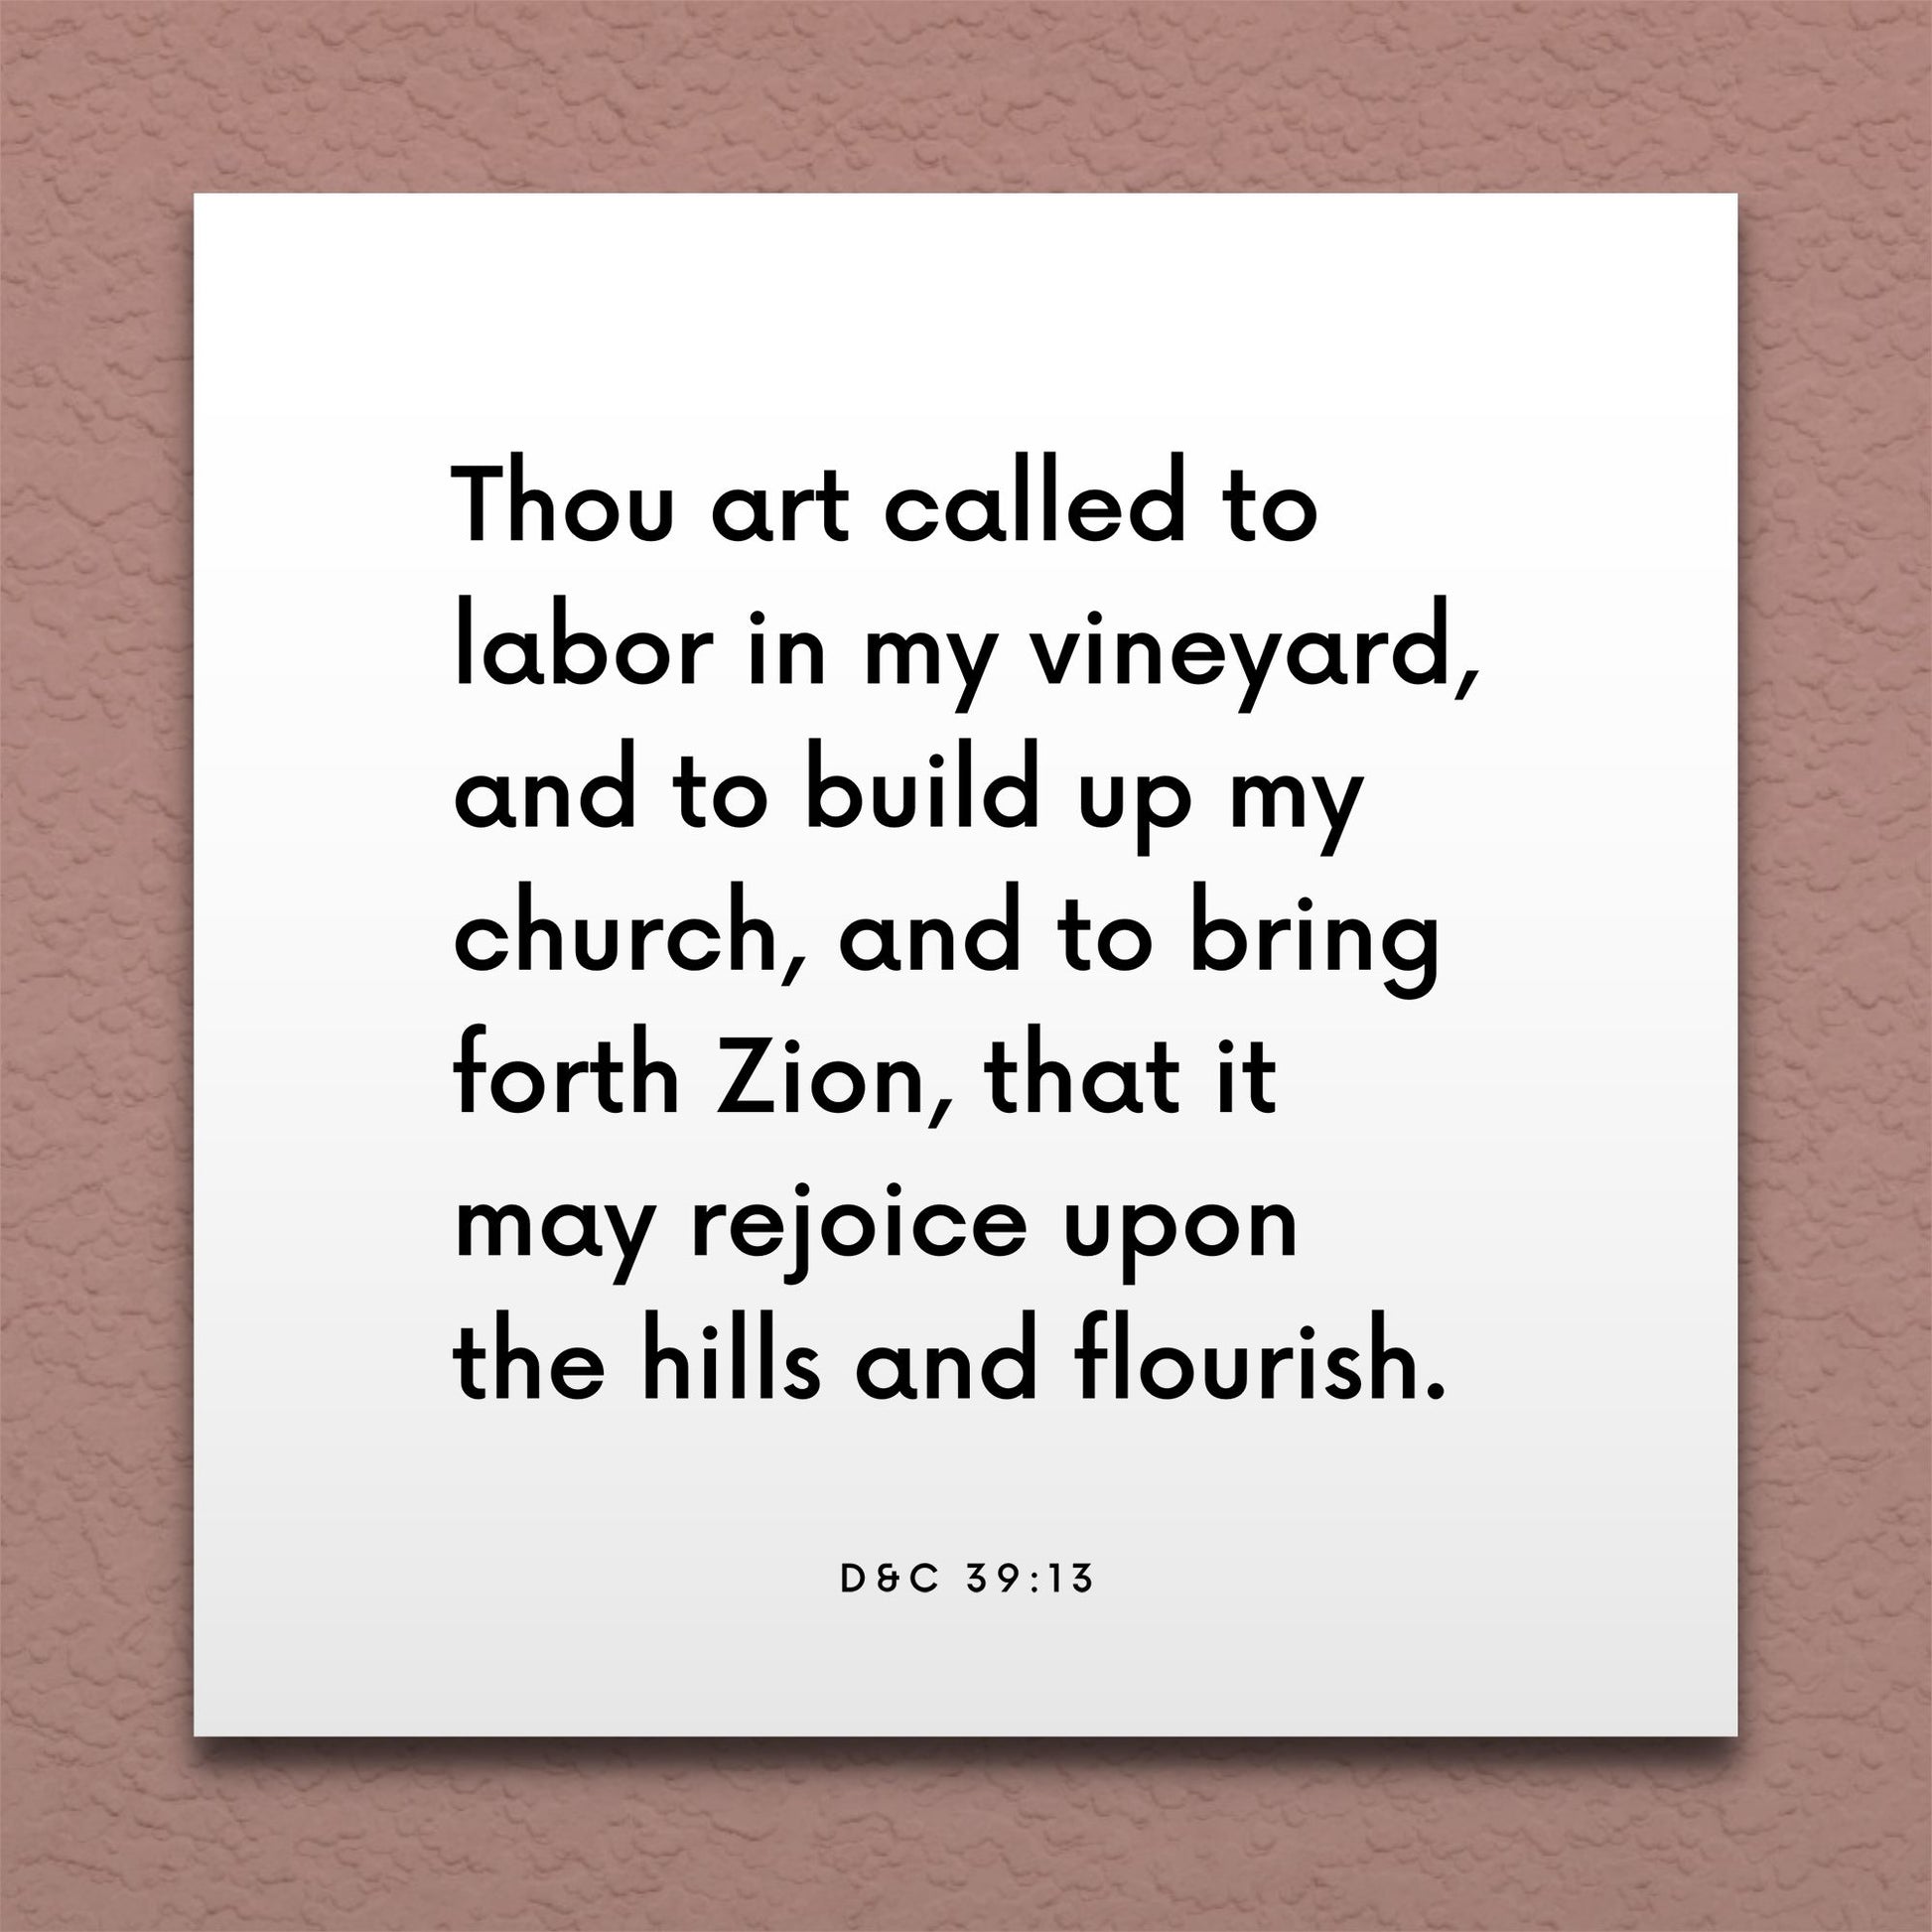 Wall-mounted scripture tile for D&C 39:13 - "Thou art called to labor in my vineyard"